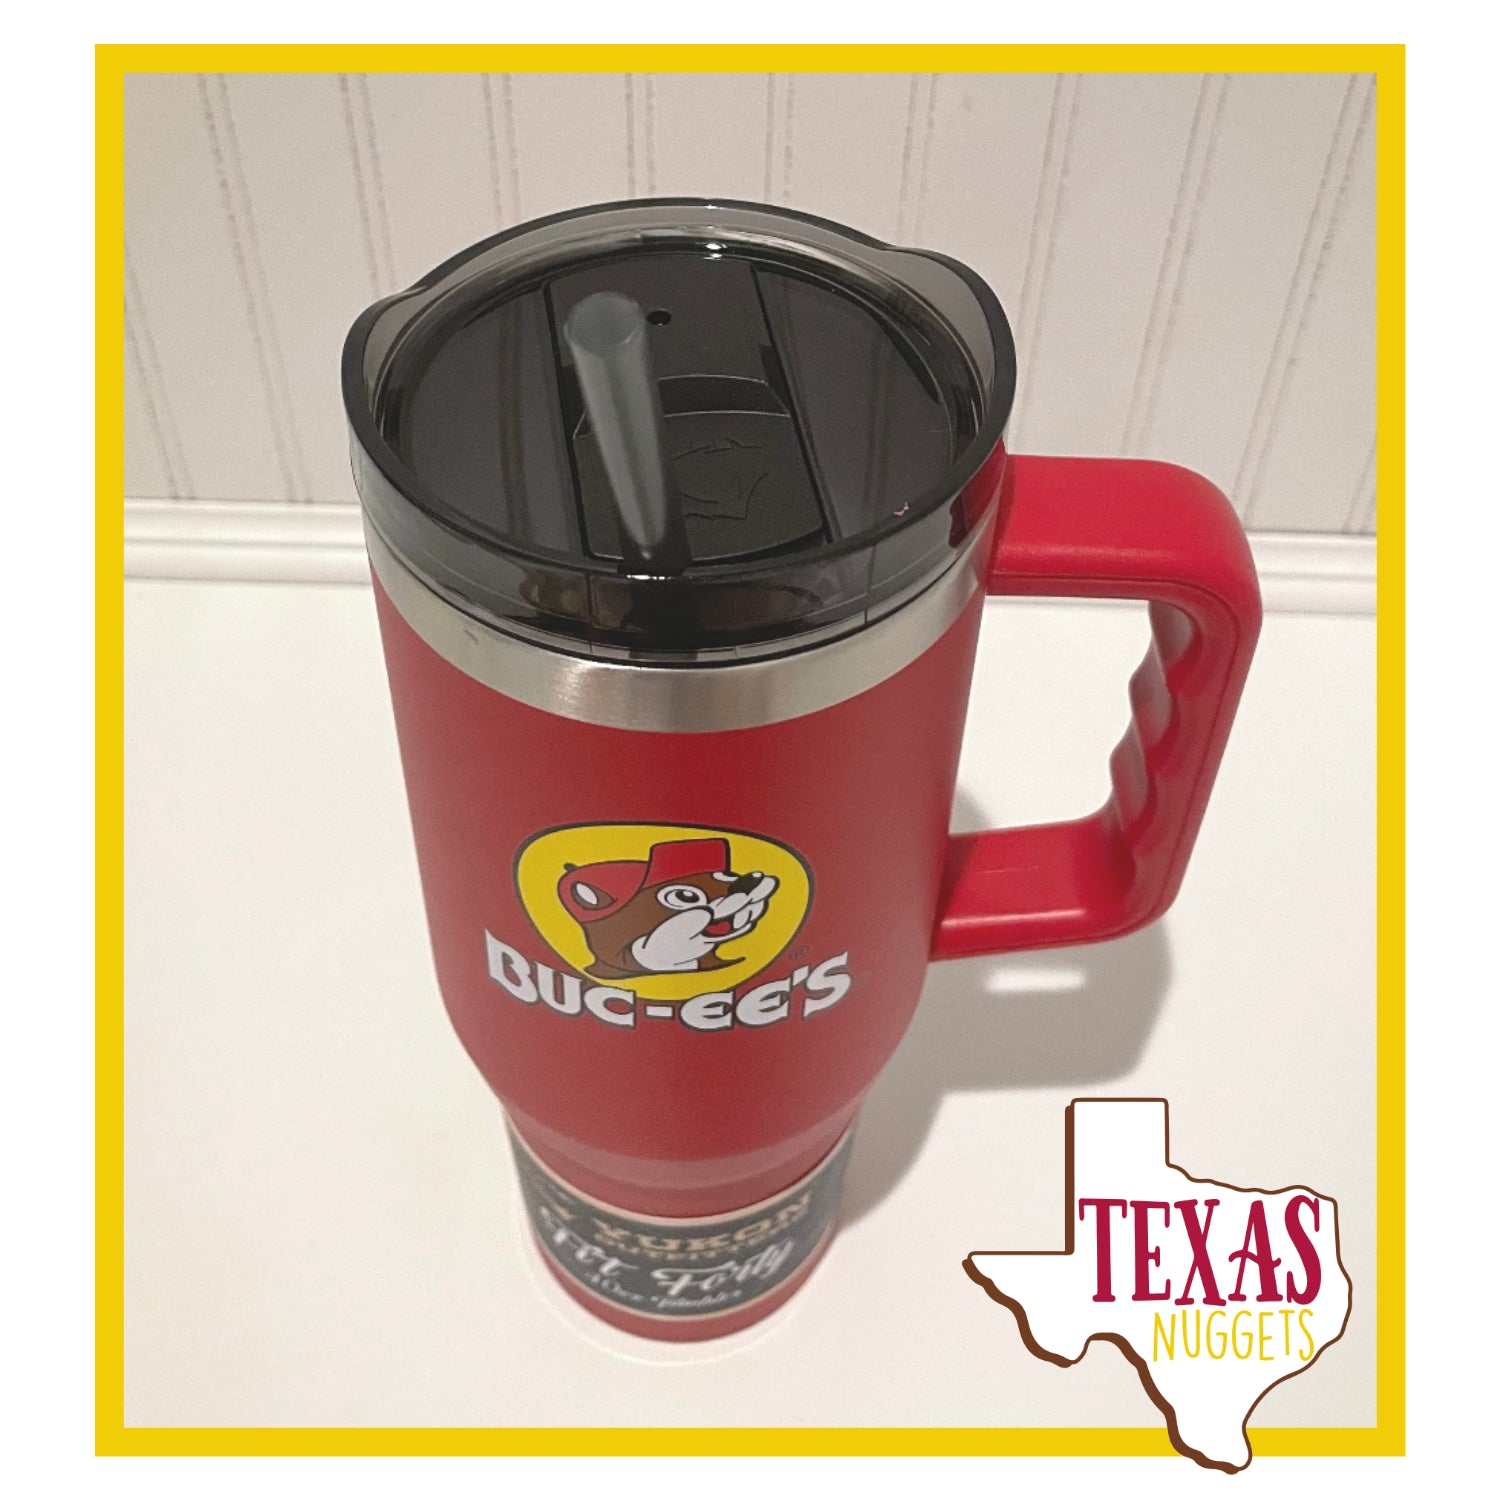 Buc-ee's Fit Forty 40 oz. Yukon Insulated Tumbler – Texas Nuggets